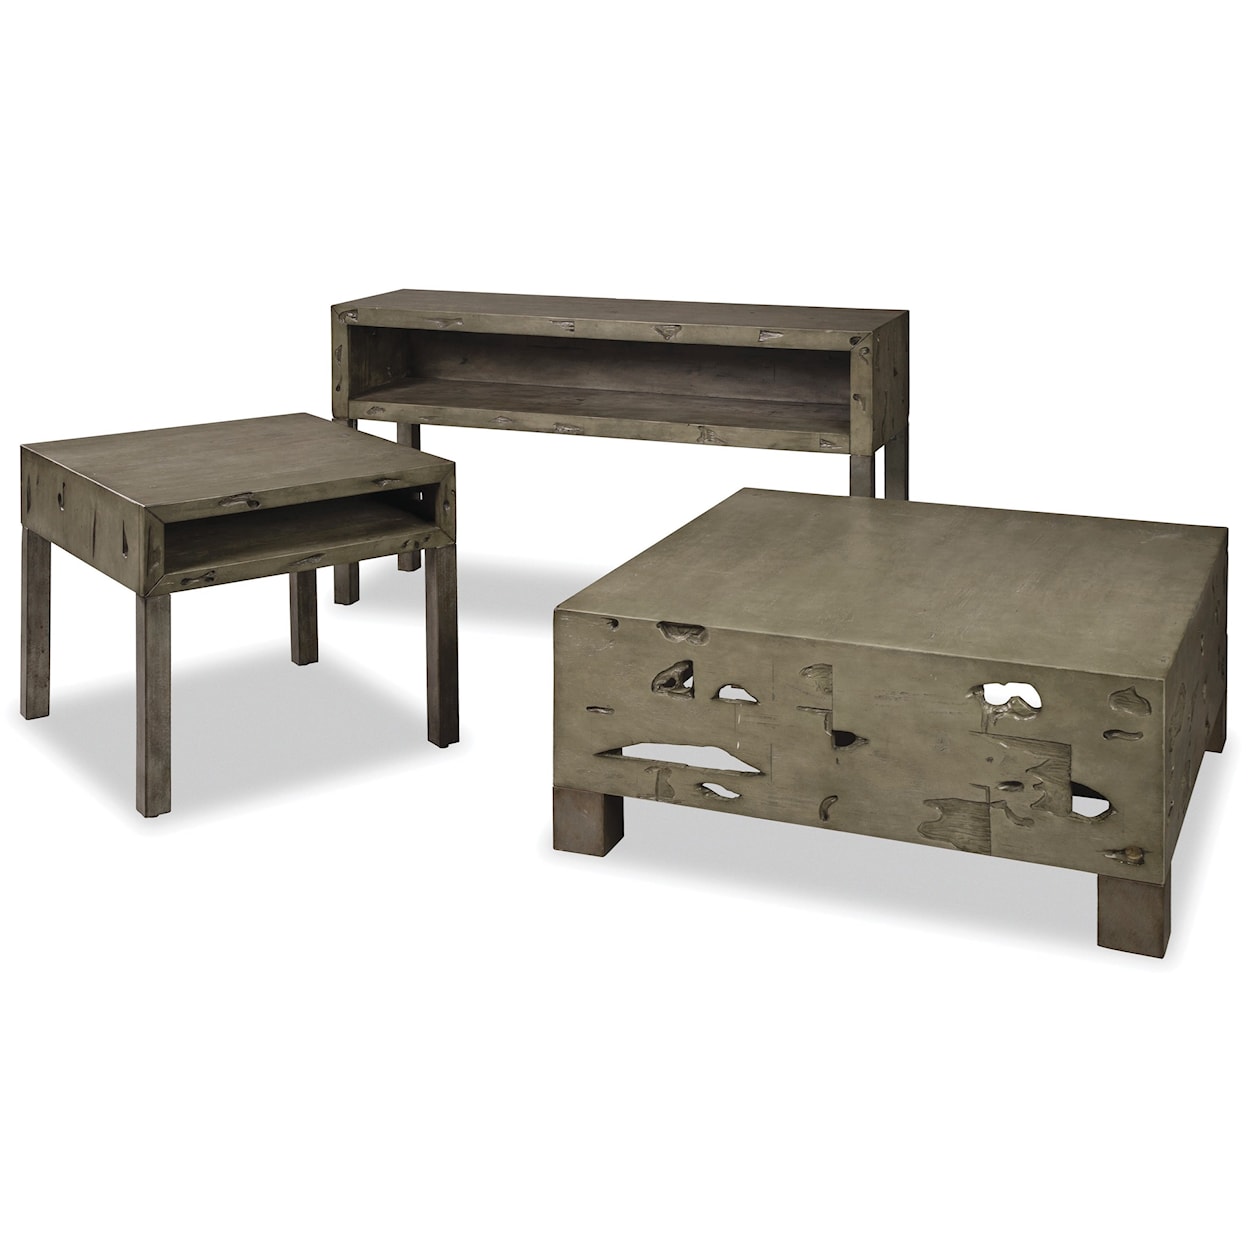 Craftmaster 991 Tables Sofa Table